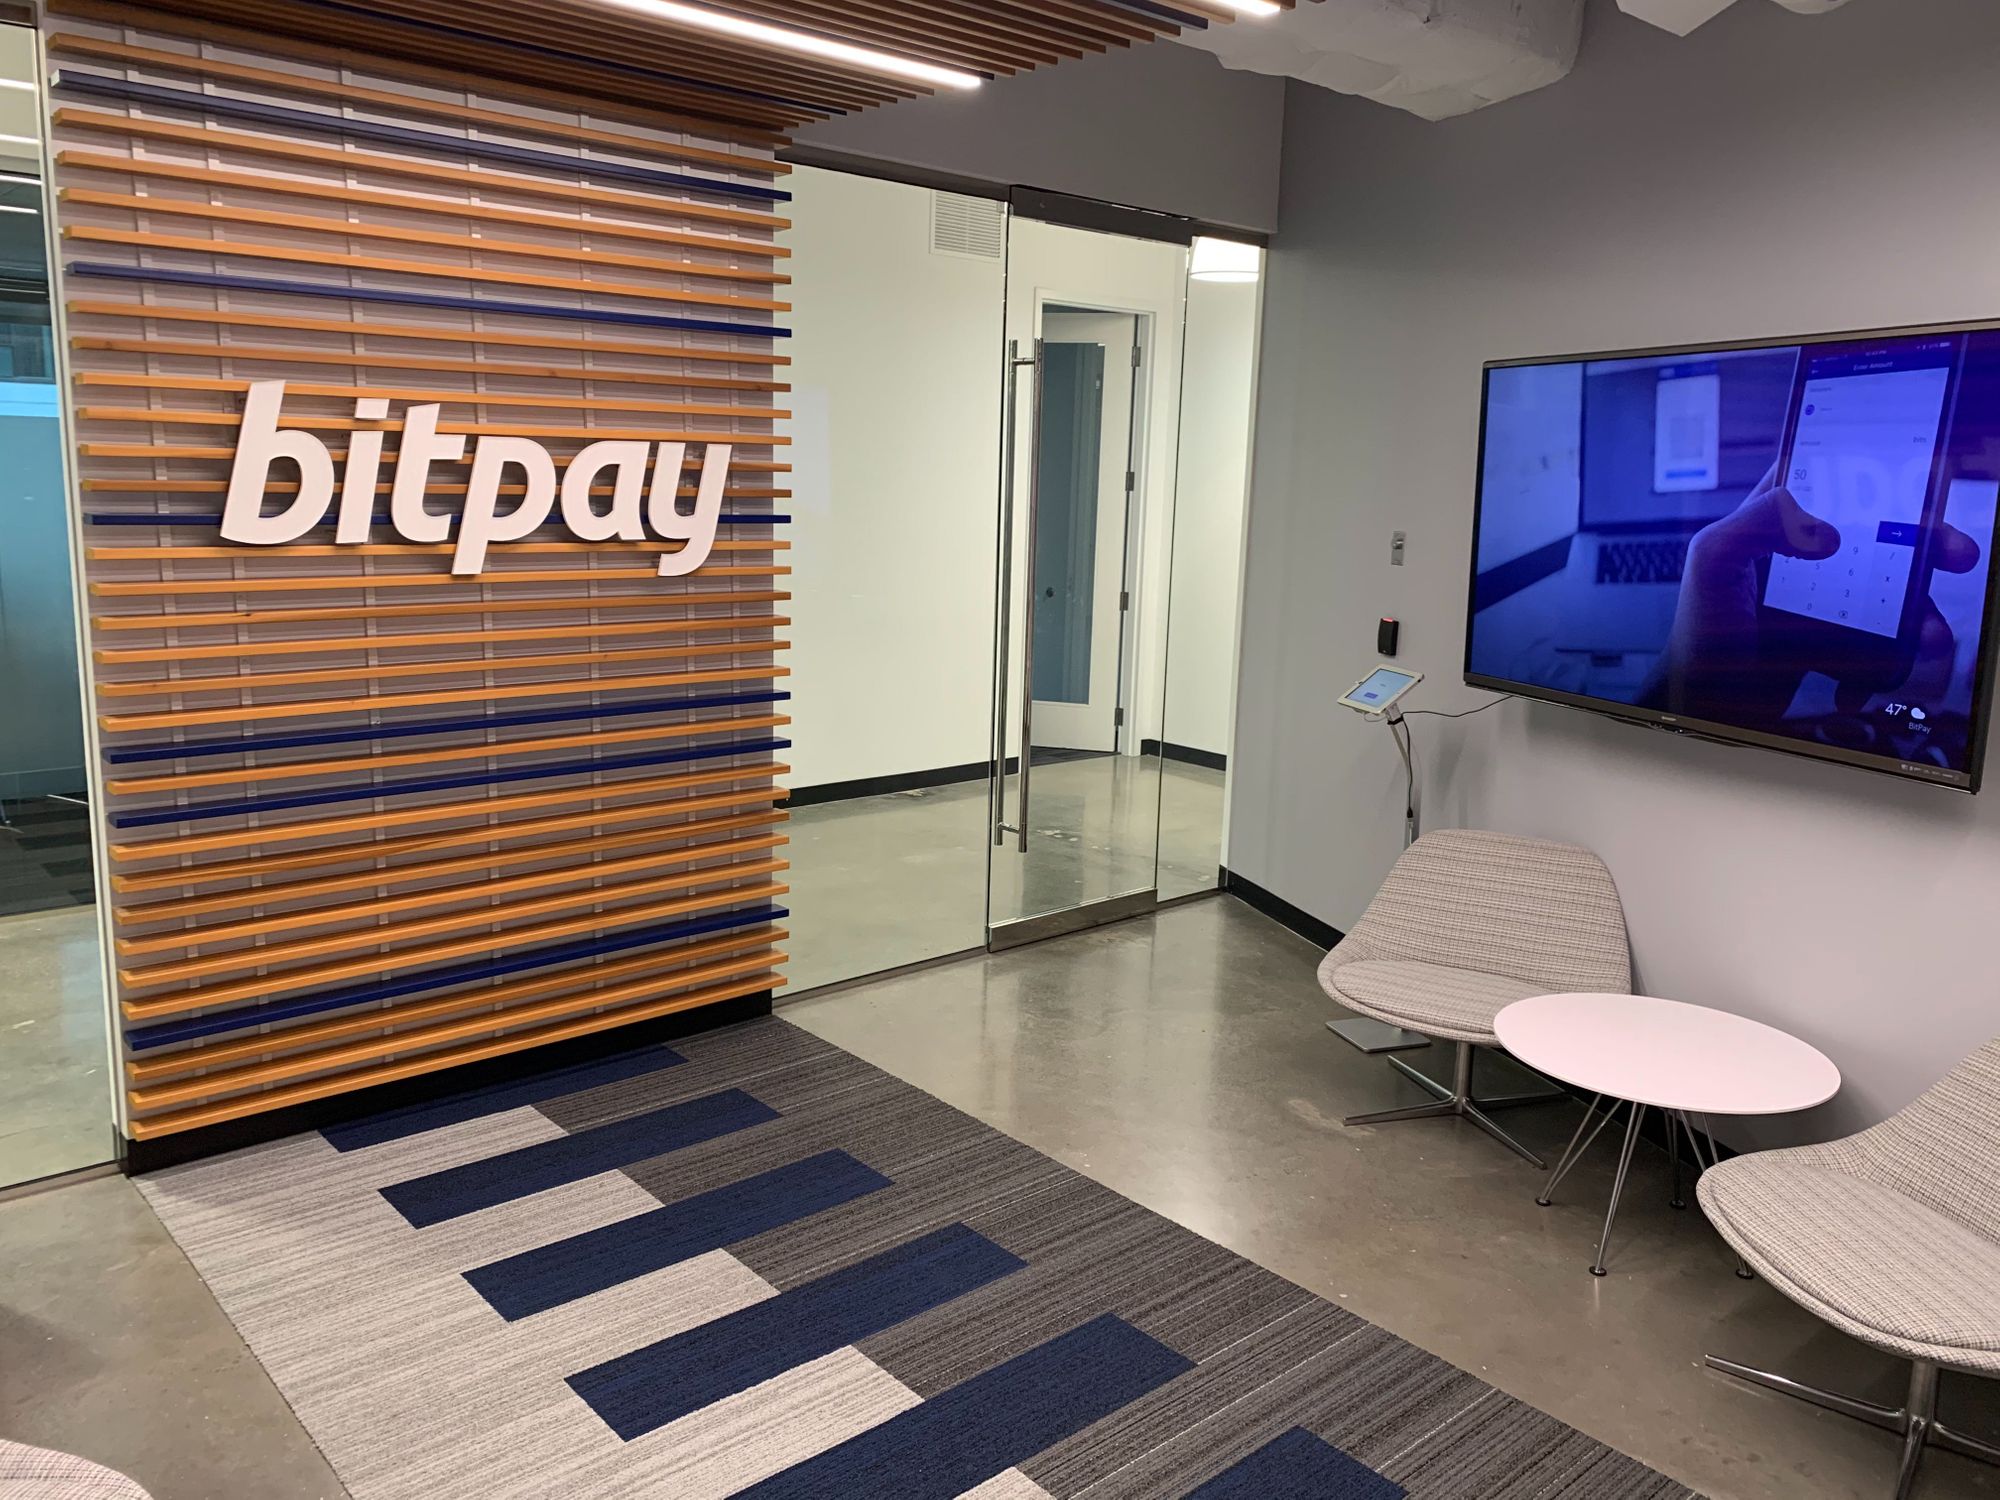 BitPay's Response to COVID-19